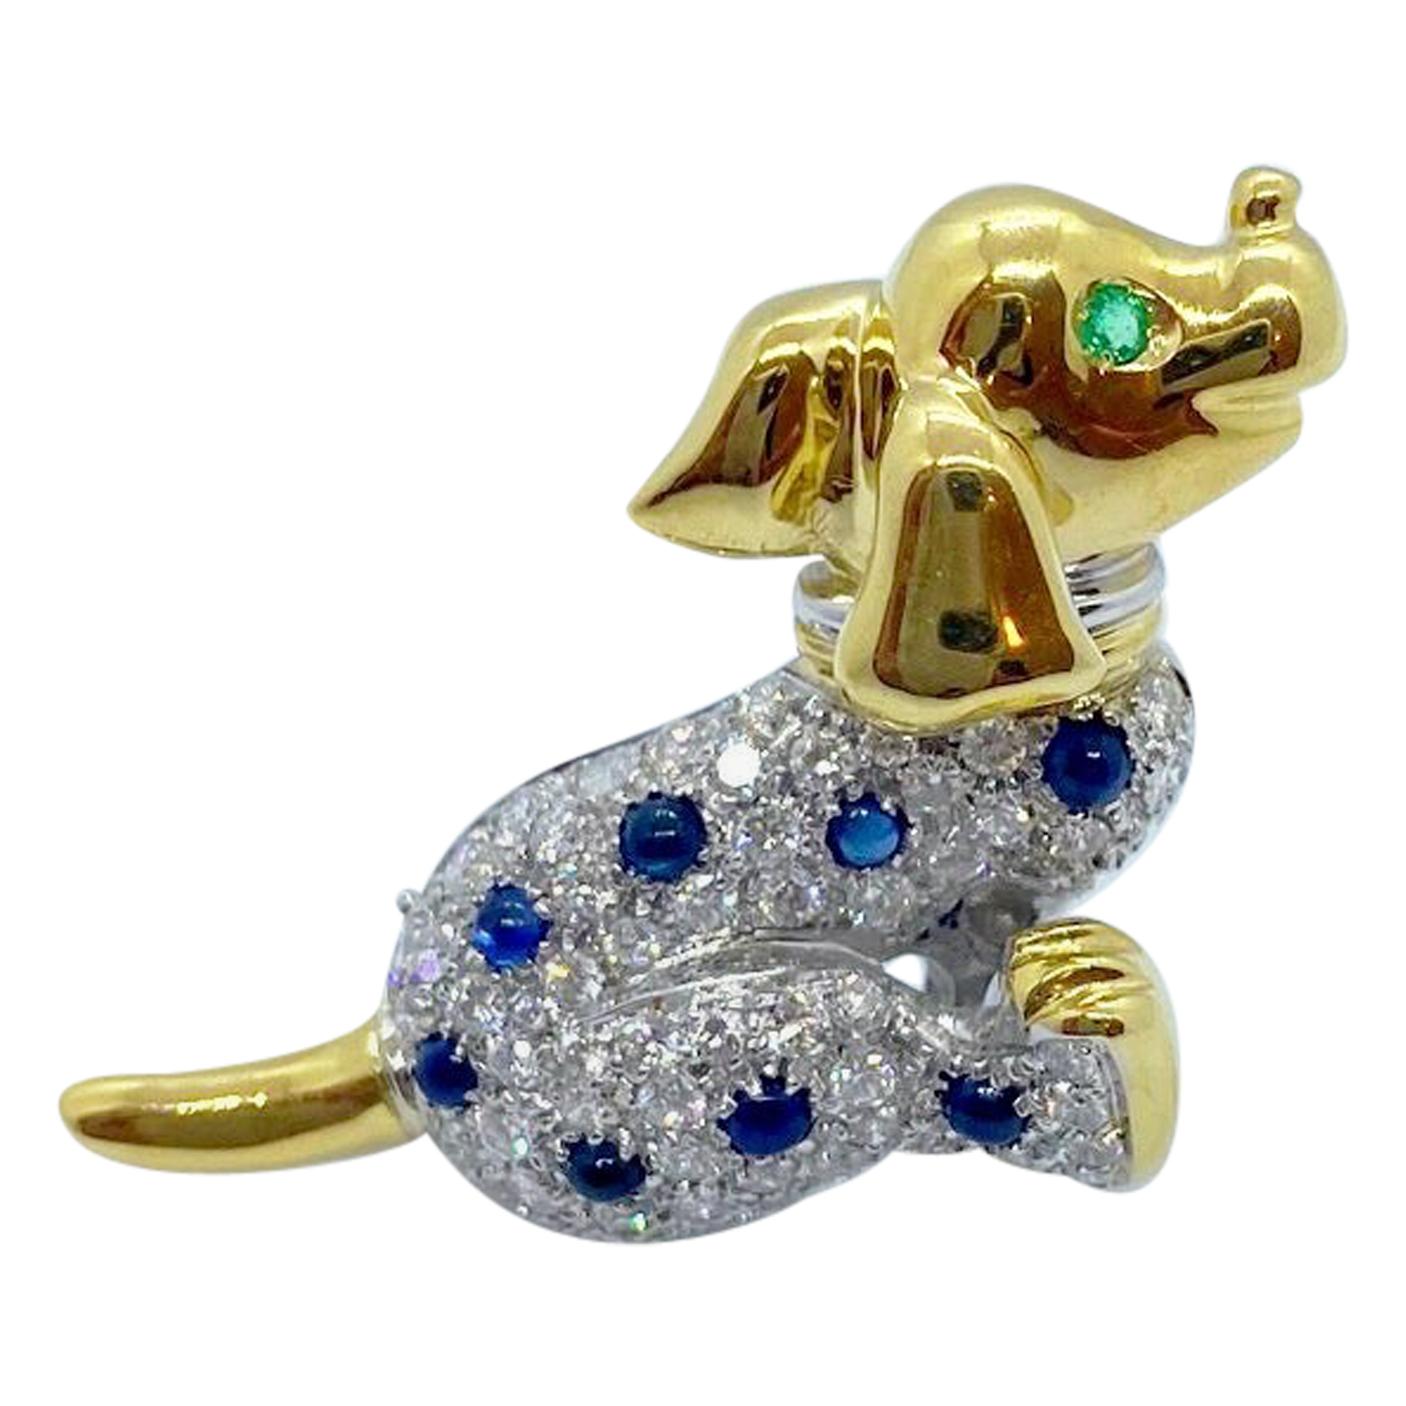 Cellini NYC 18KT YG/WG Gold Dalmatian Brooch with .98Ct. Diamonds & Sapphires